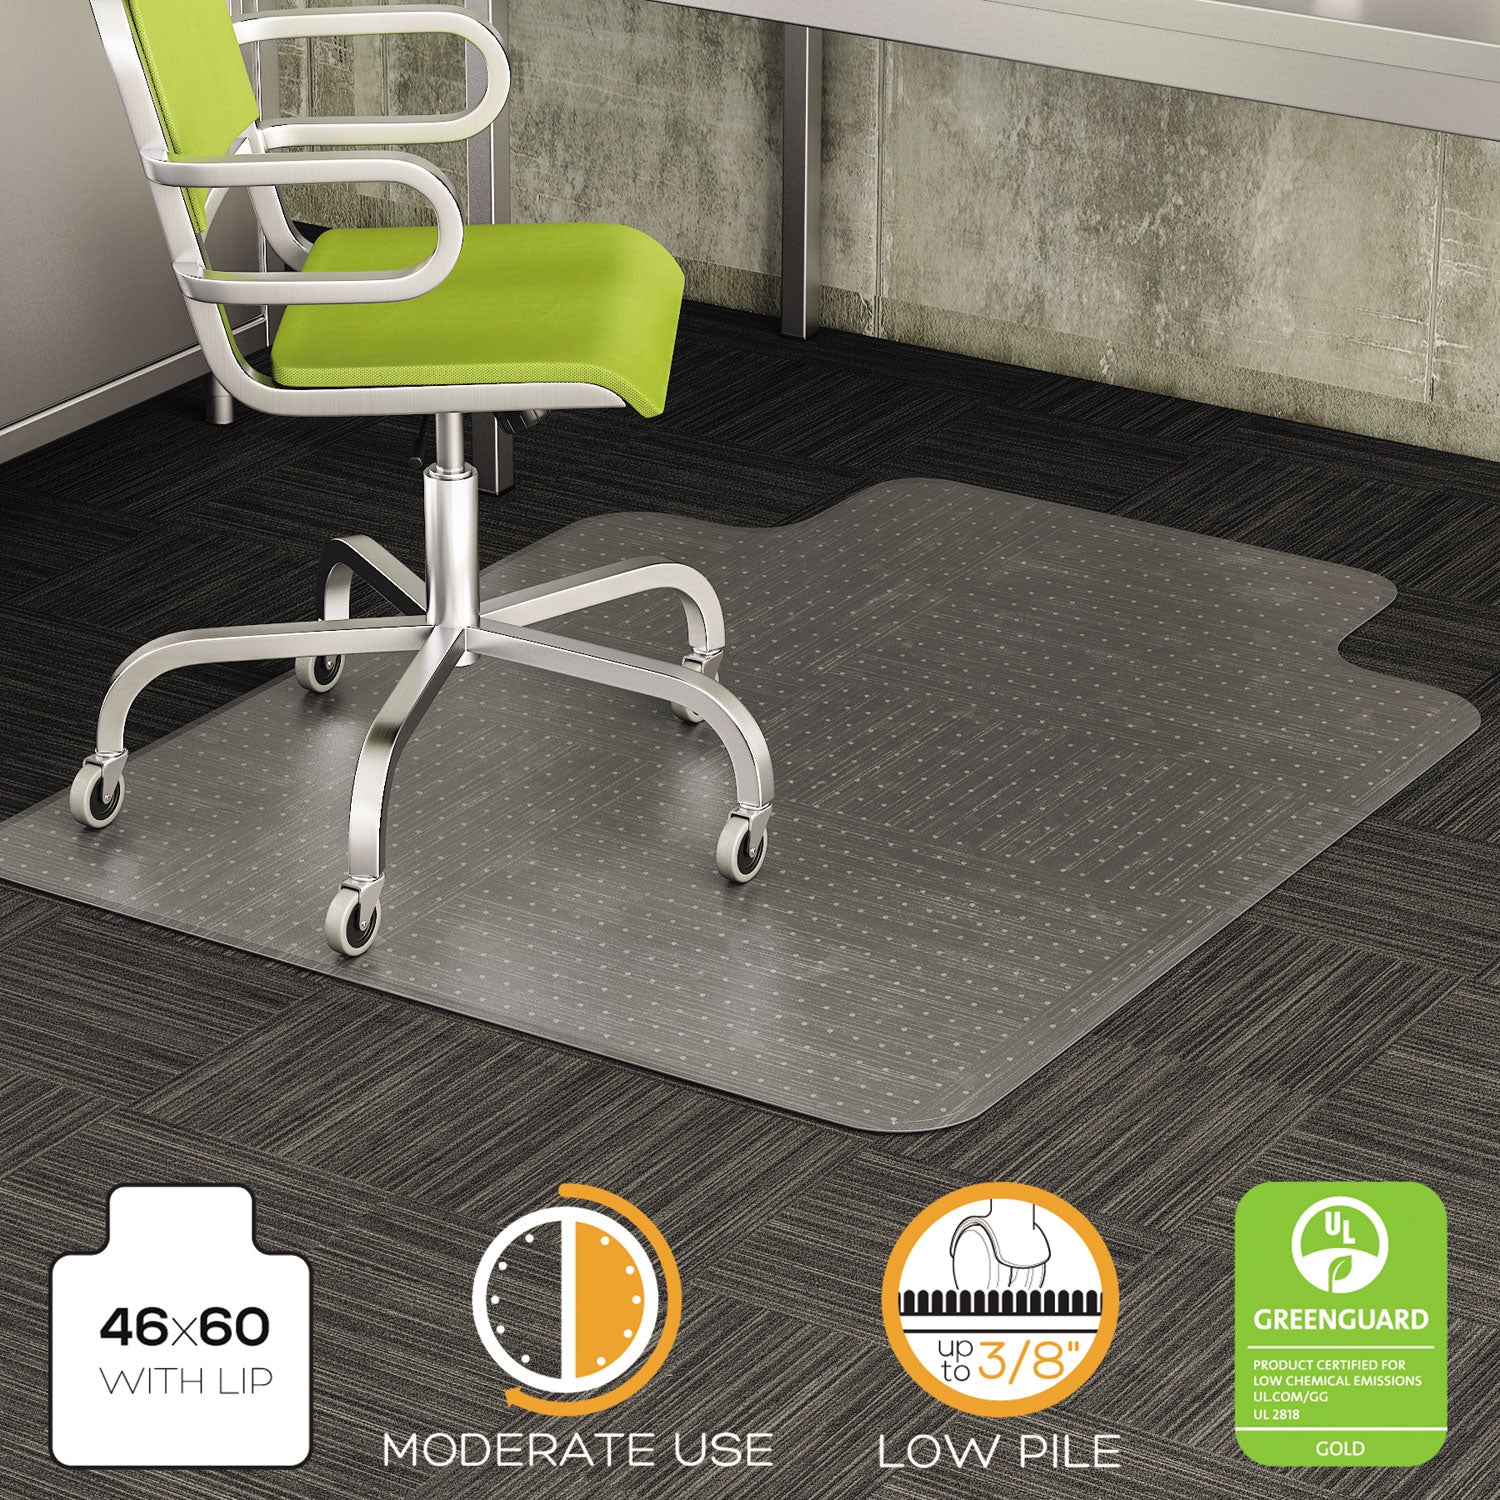 DuraMat Moderate Use Chair Mat for Low Pile Carpet, 46 x 60, Wide Lipped, Clear - 1